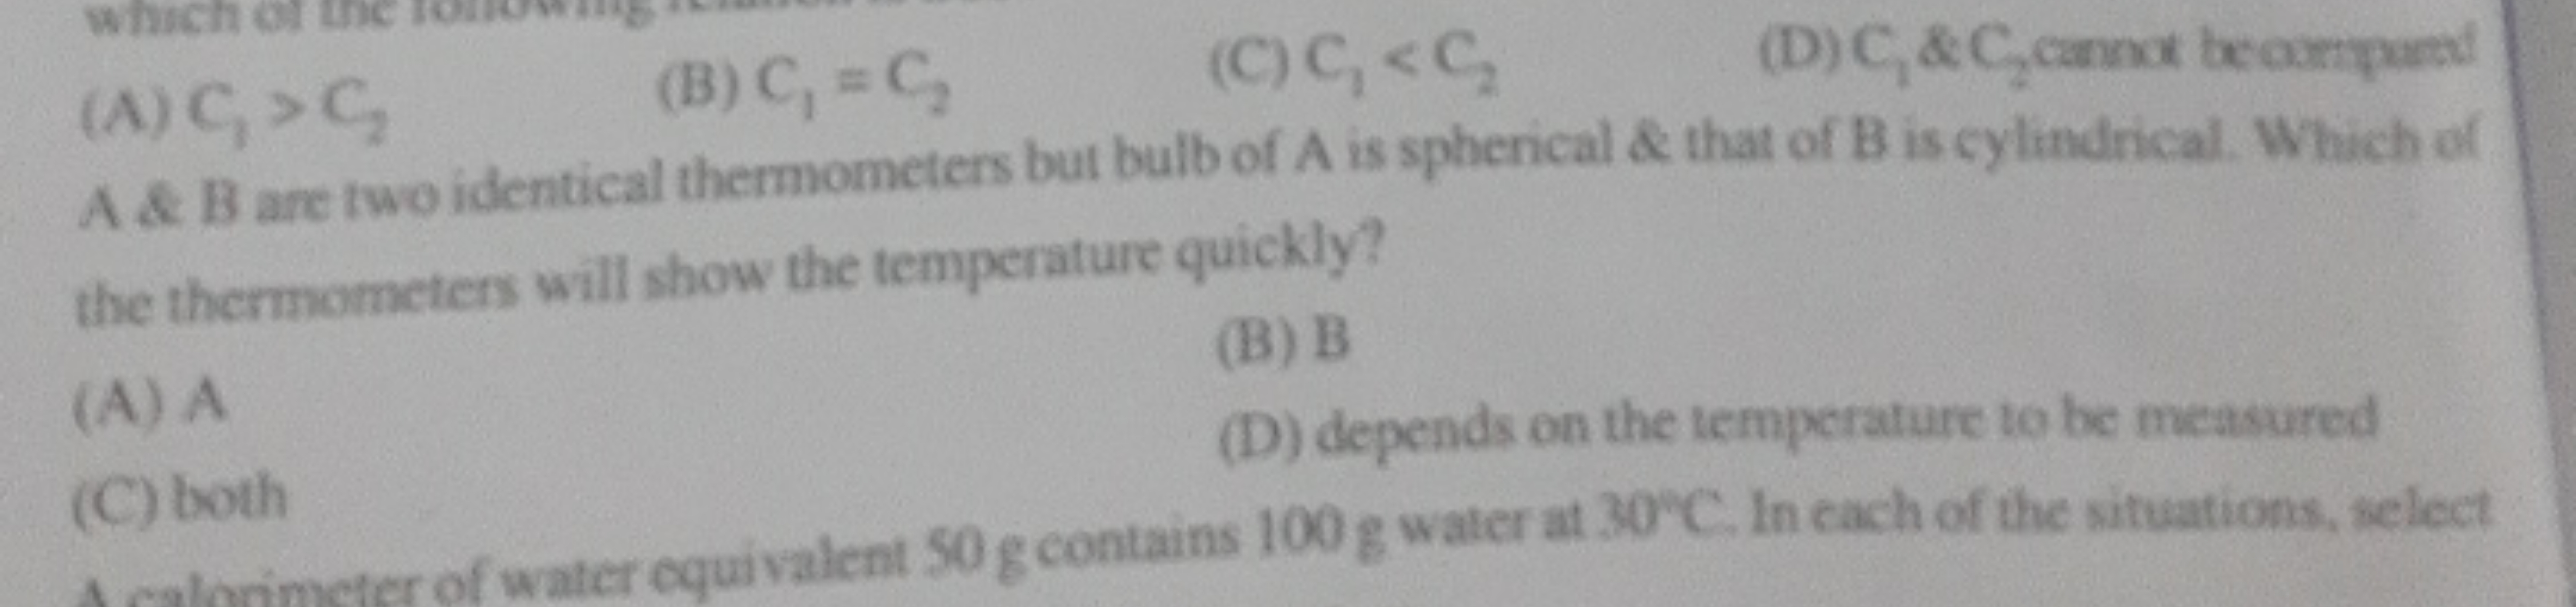 A \& B are two identical thermometers but bulb of A is spherical \& th